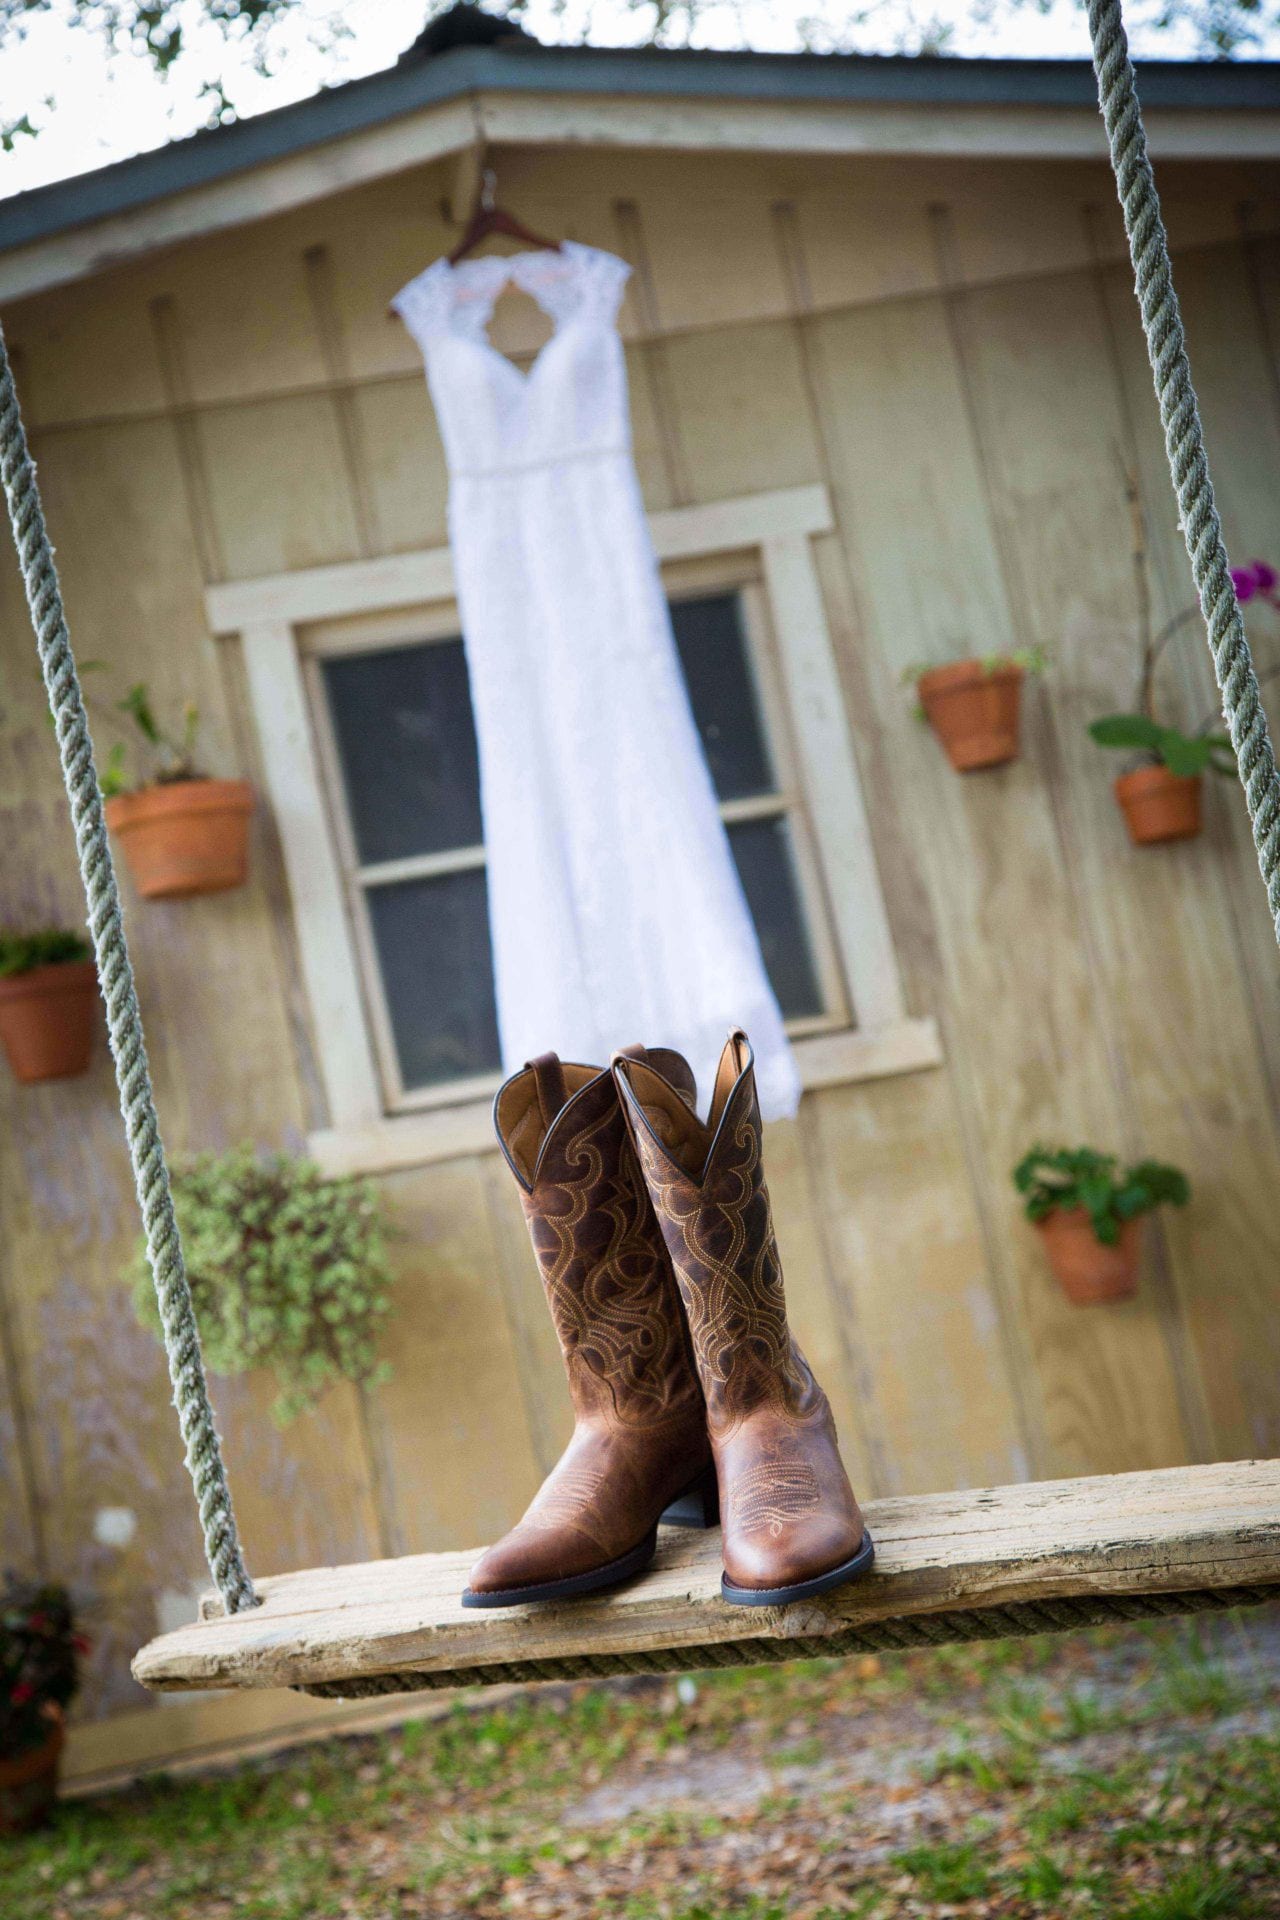 posing bride's gown with boots